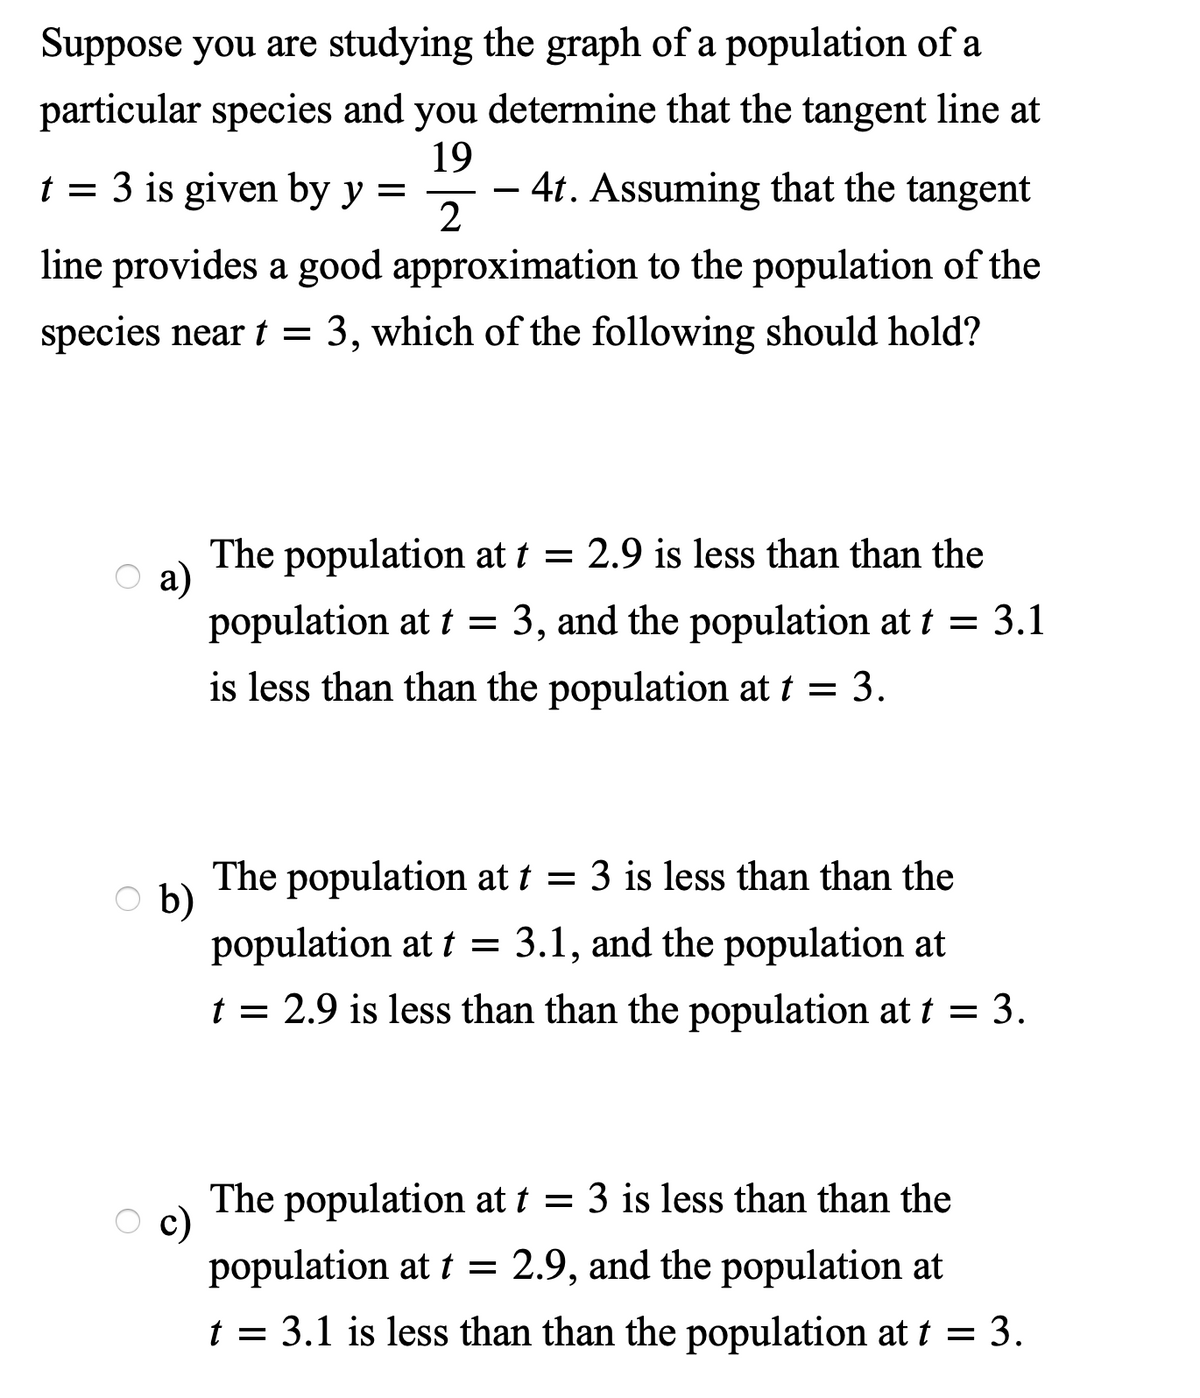 Suppose you are studying the graph of a population of a
particular species and you determine that the tangent line at
19
- 4t. Assuming that the tangent
2
= 3 is given by y =
-
line provides a good approximation to the population of the
species near t = 3, which of the following should hold?
The population at t = 2.9 is less than than the
а)
population at t =
3, and the population at t = 3.1
is less than than the population at t = 3.
The population at t = 3 is less than than the
b)
population at t = 3.1, and the population at
t = 2.9 is less than than the population at t = 3.
The population at t = 3 is less than than the
c)
population at t =
2.9, and the population at
t = 3.1 is less than than the population at t = 3.
